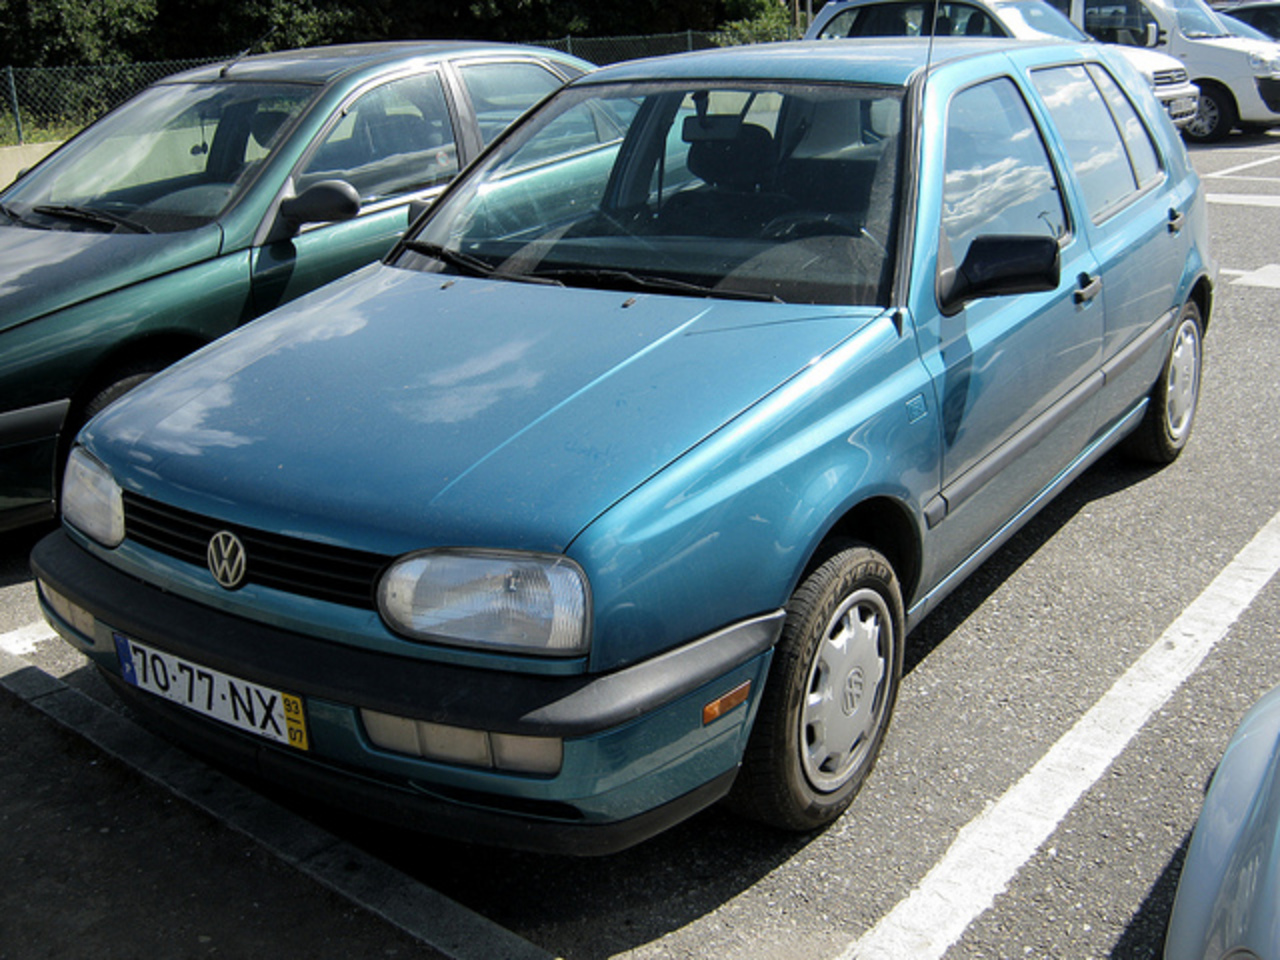 Flickr: The Cars of the 90s! Pool